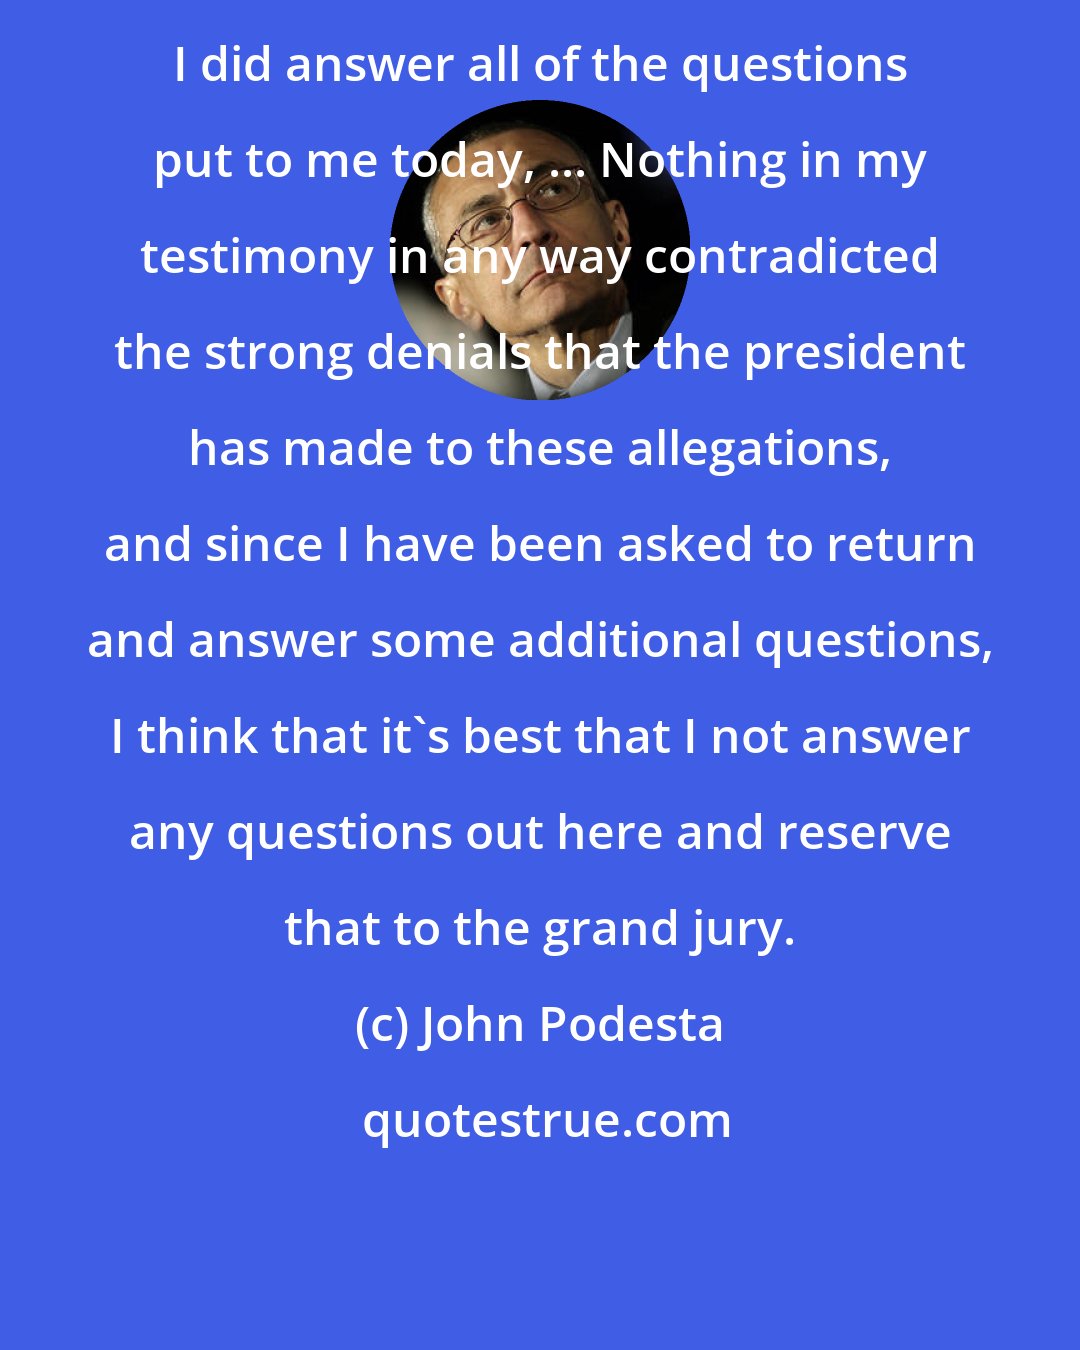 John Podesta: I did answer all of the questions put to me today, ... Nothing in my testimony in any way contradicted the strong denials that the president has made to these allegations, and since I have been asked to return and answer some additional questions, I think that it's best that I not answer any questions out here and reserve that to the grand jury.